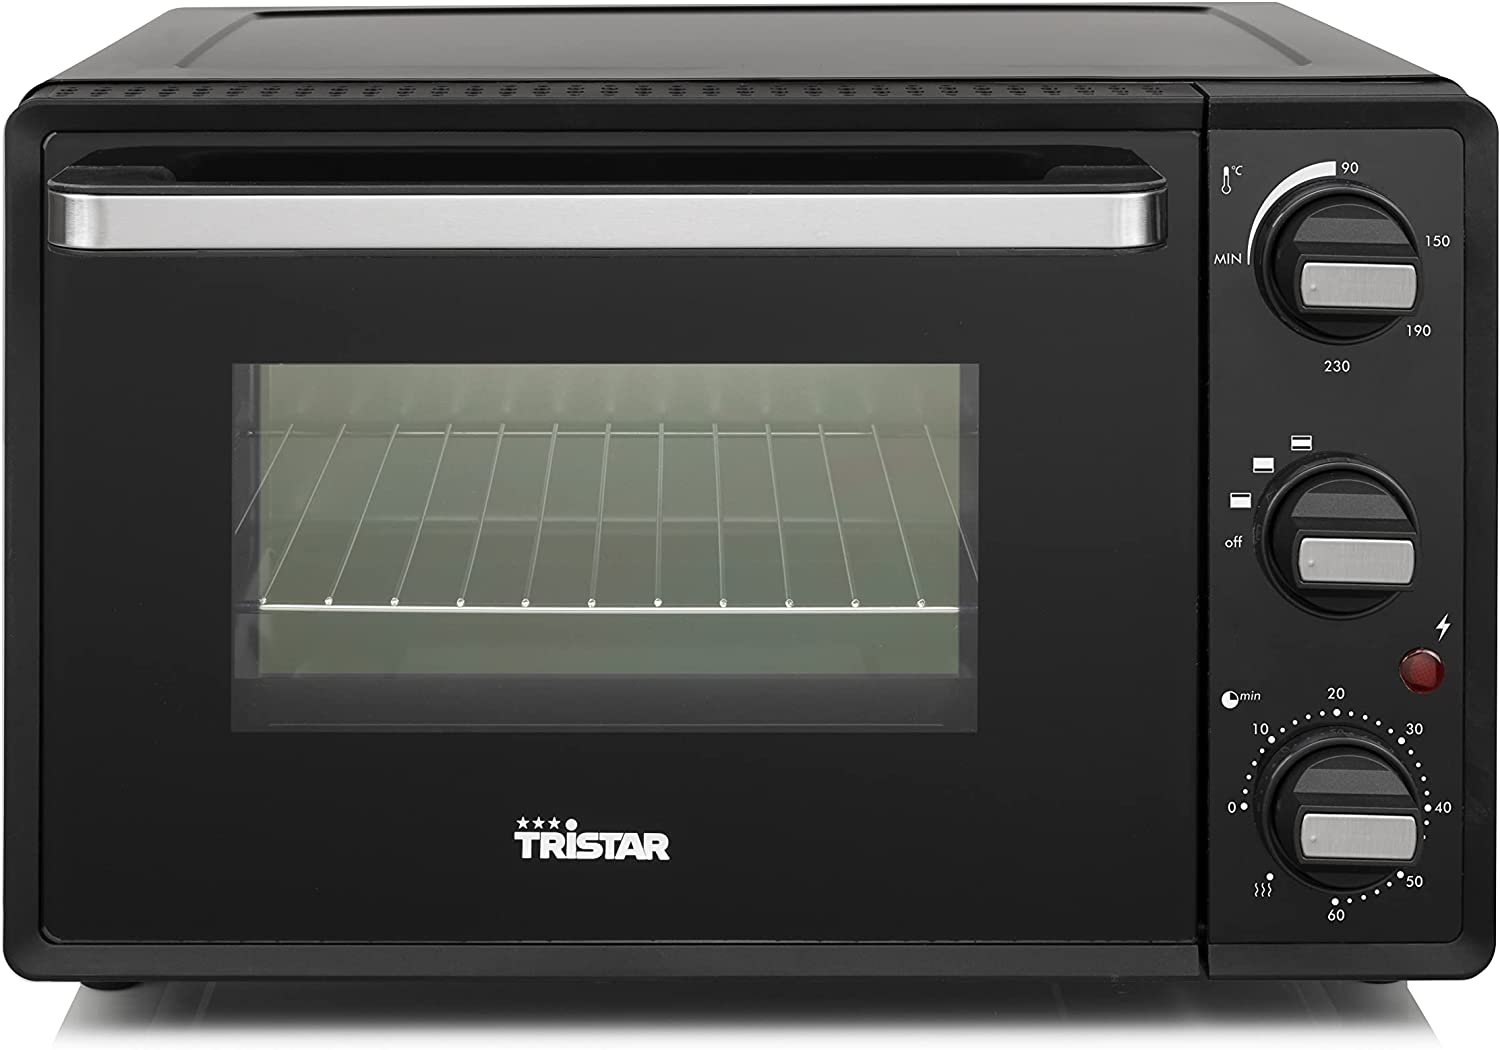 Tristar OV-3615 Mini Oven for Grilling, Baking and Toasting, 60 Minute Timer, Capacity 10 Litres, 800 Watt Power, Black